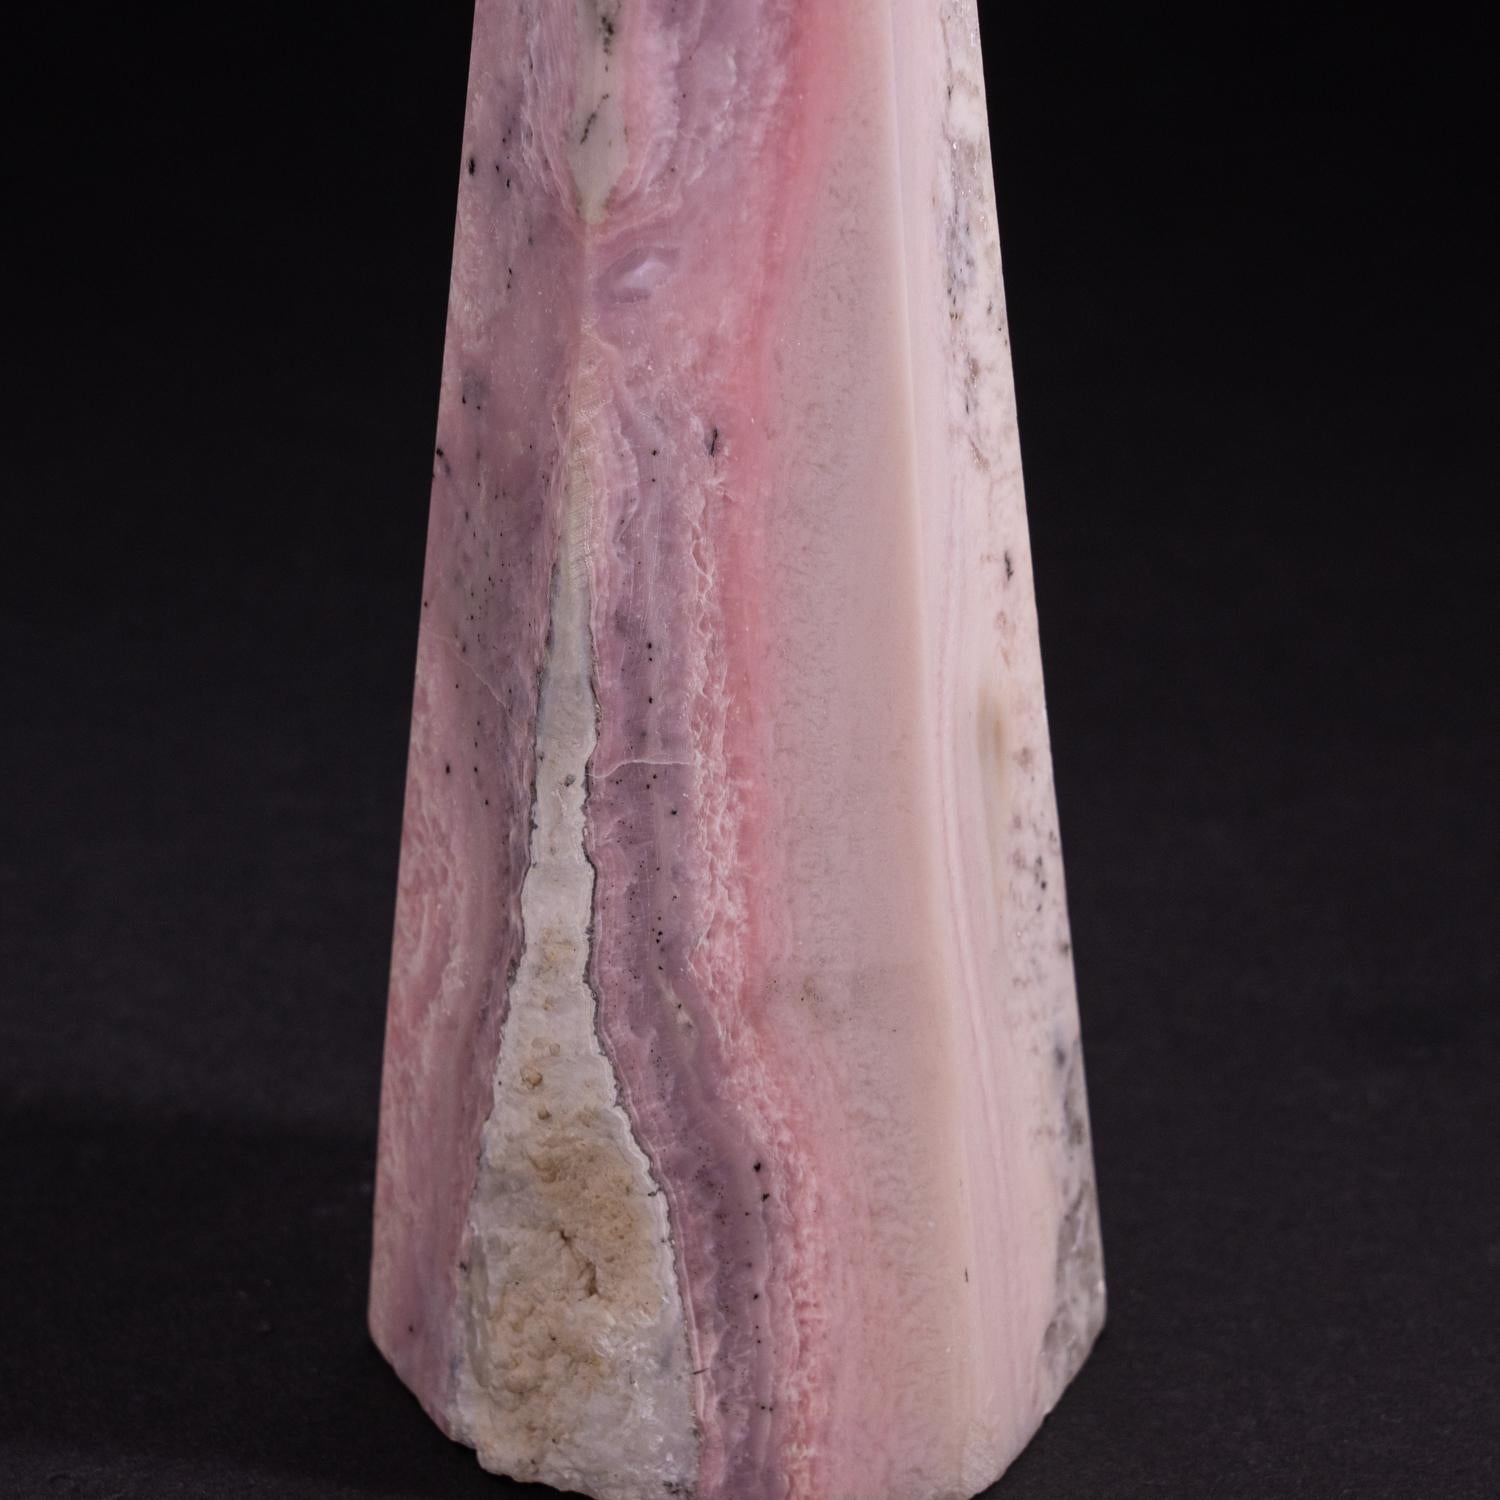 AAA-quality, unique Pink Opal obelisk from Peru. Pink colored, semi-precious gemstone of the Silicate mineral family. It has vibrant hues of light pink with veins of reddish pink, white and grey colors.

Pink Opal is a love stone with a deep